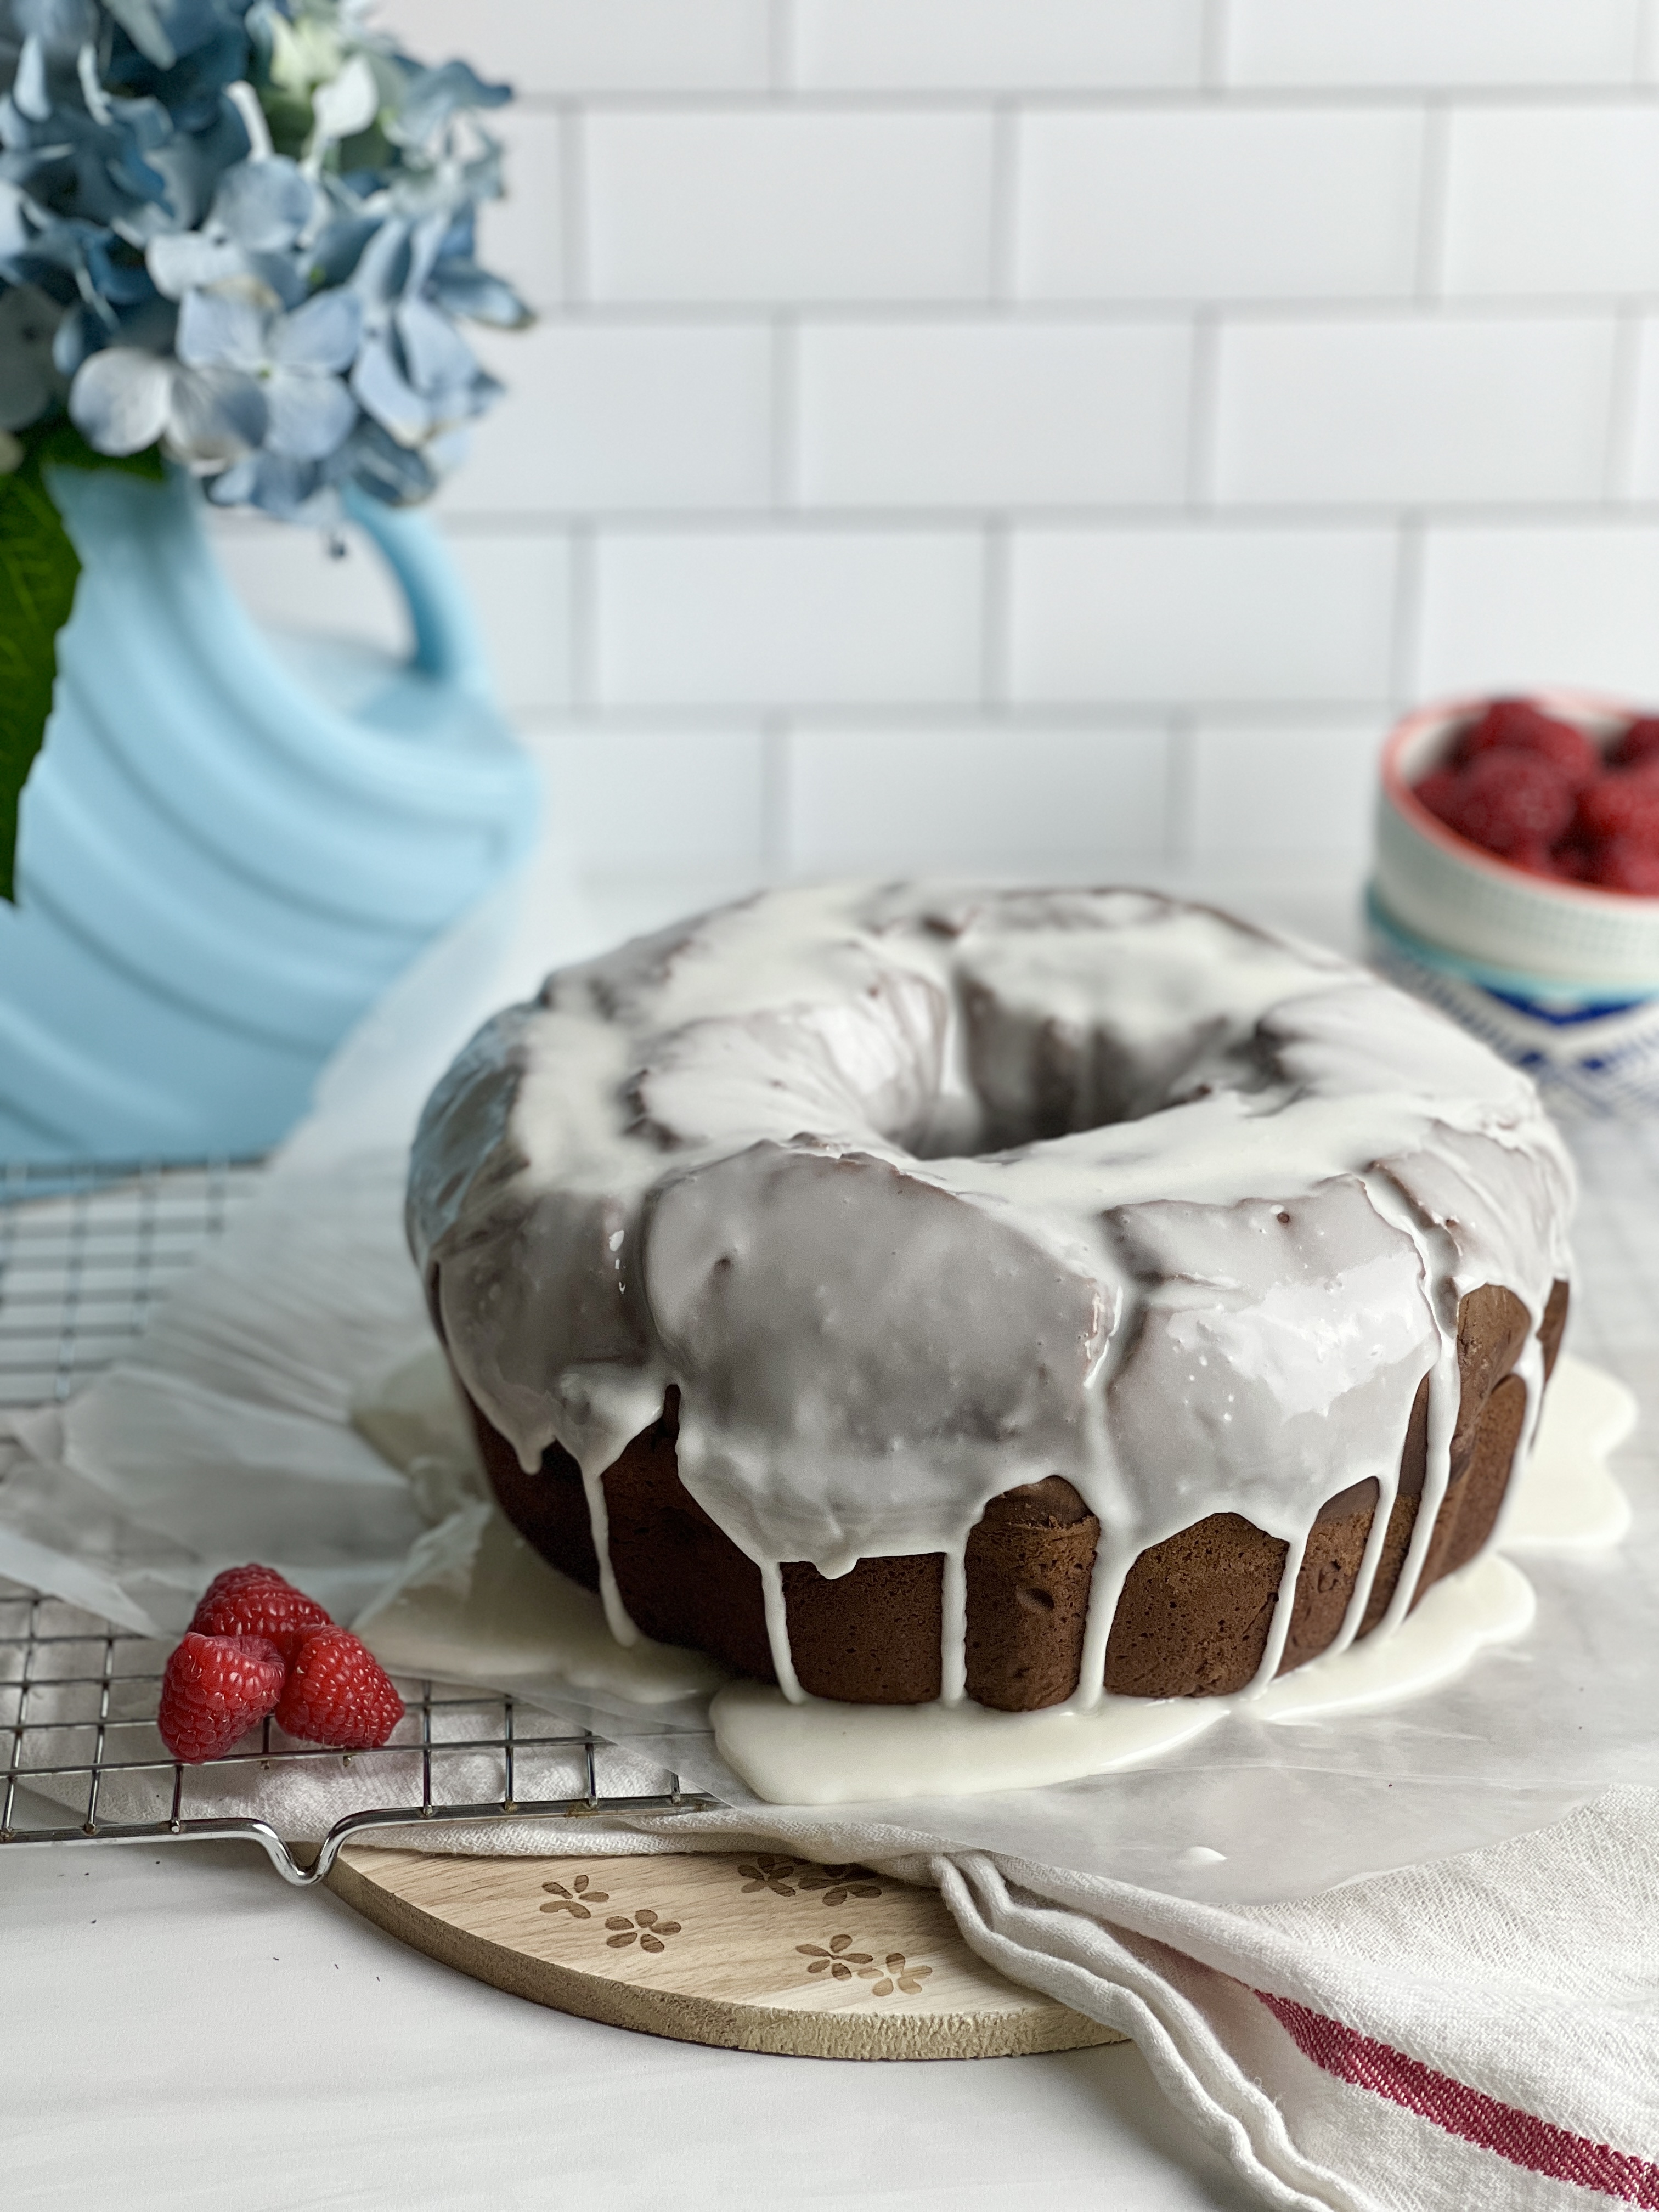 This chocolatey glazed old fashion chocolate donut cake is the perfect dessert!